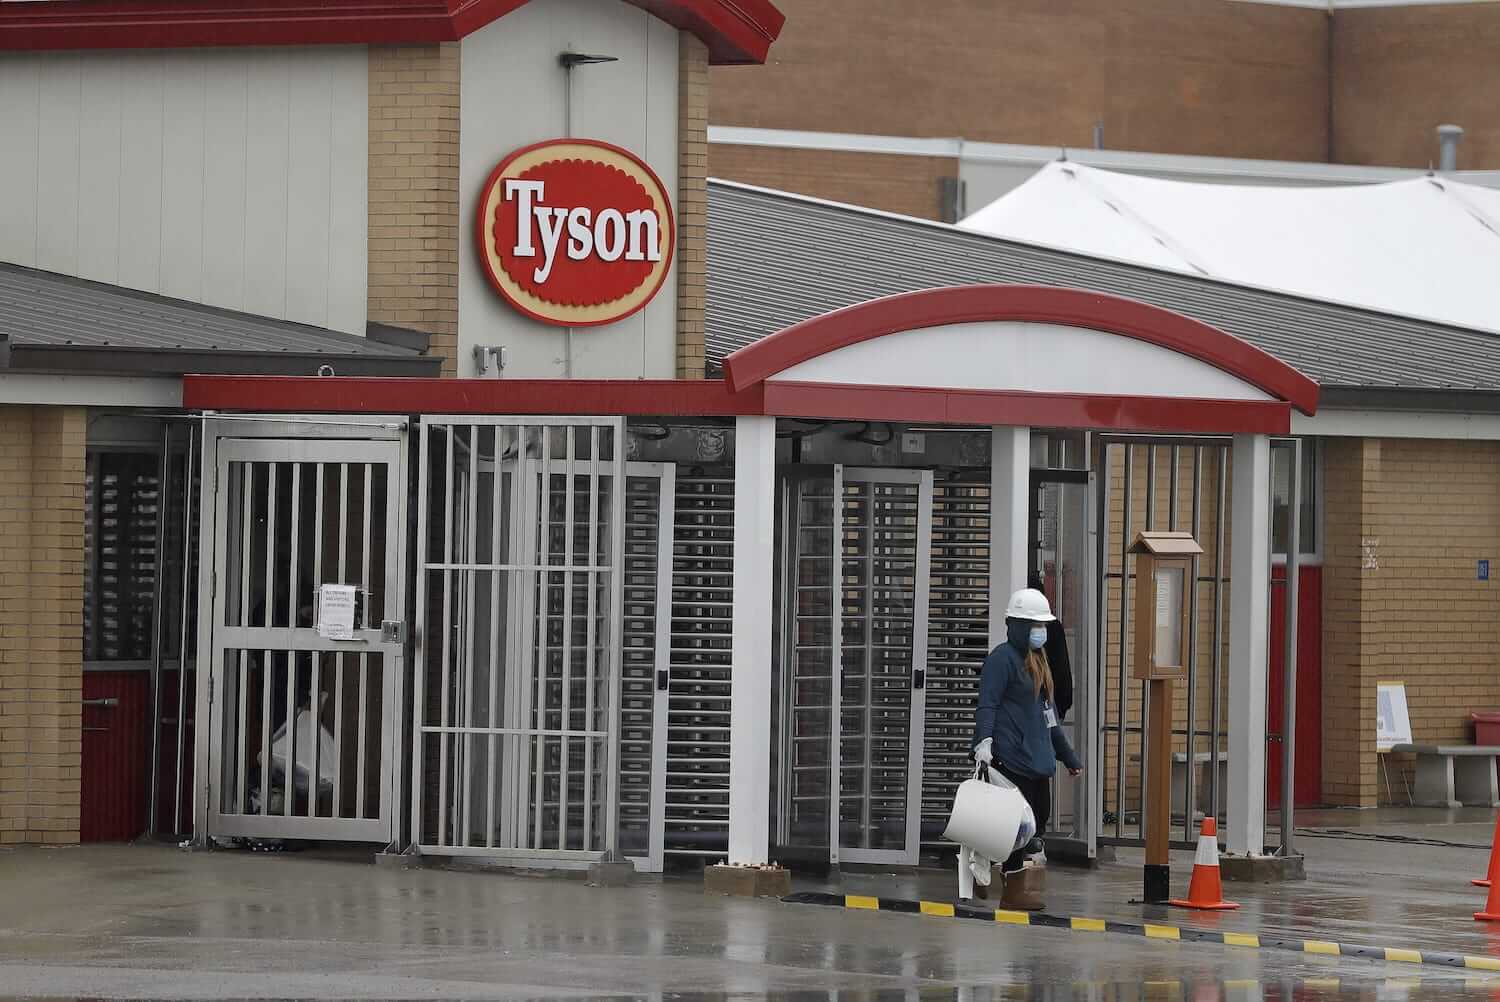 Trump to order meat plant to stay open, including this Tyson one in Logansport, Indiana.